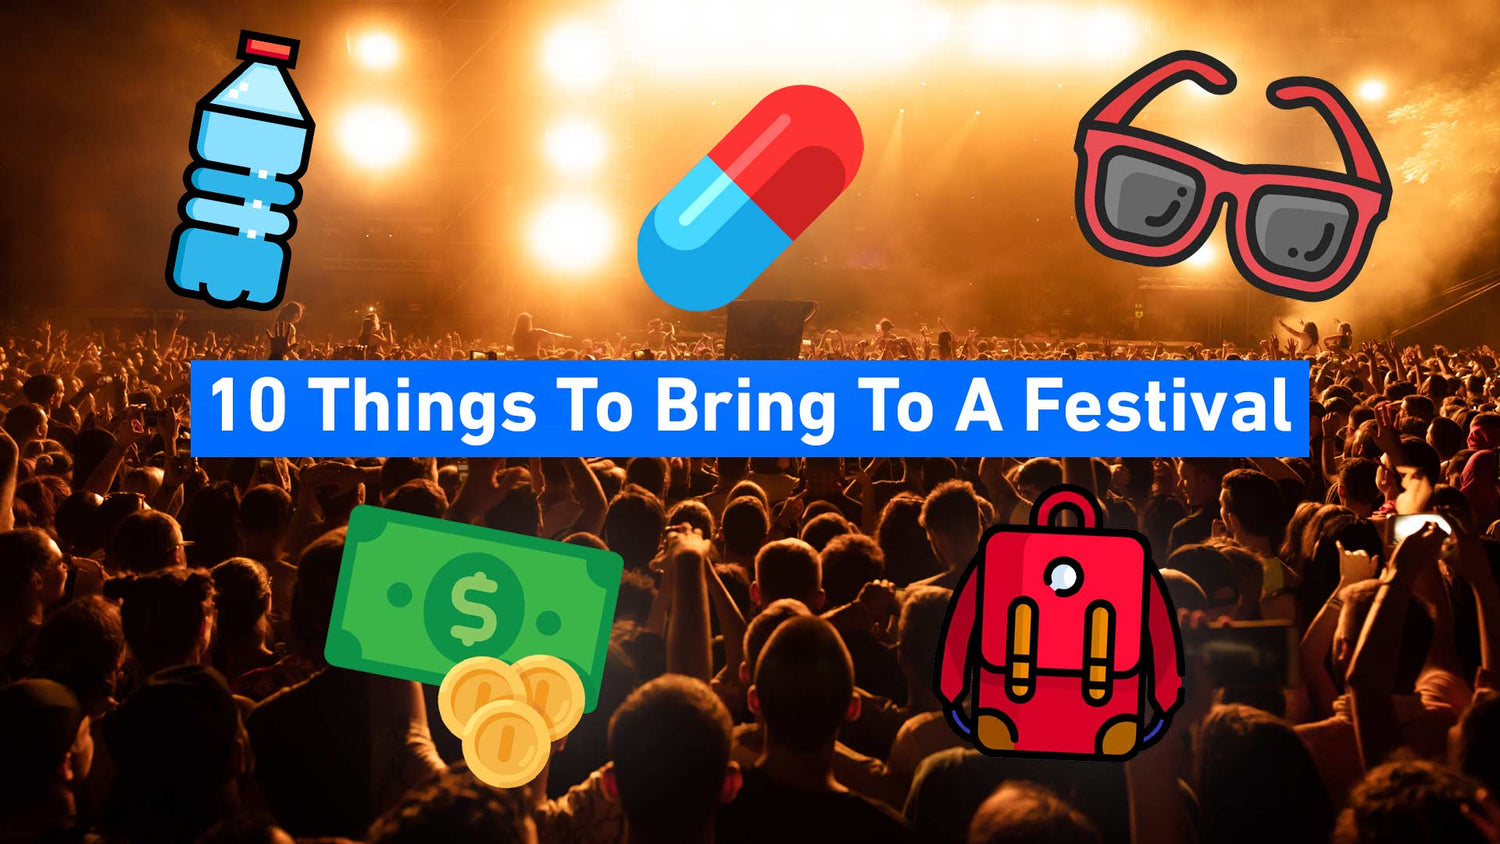 10 Things To Bring To A Festival